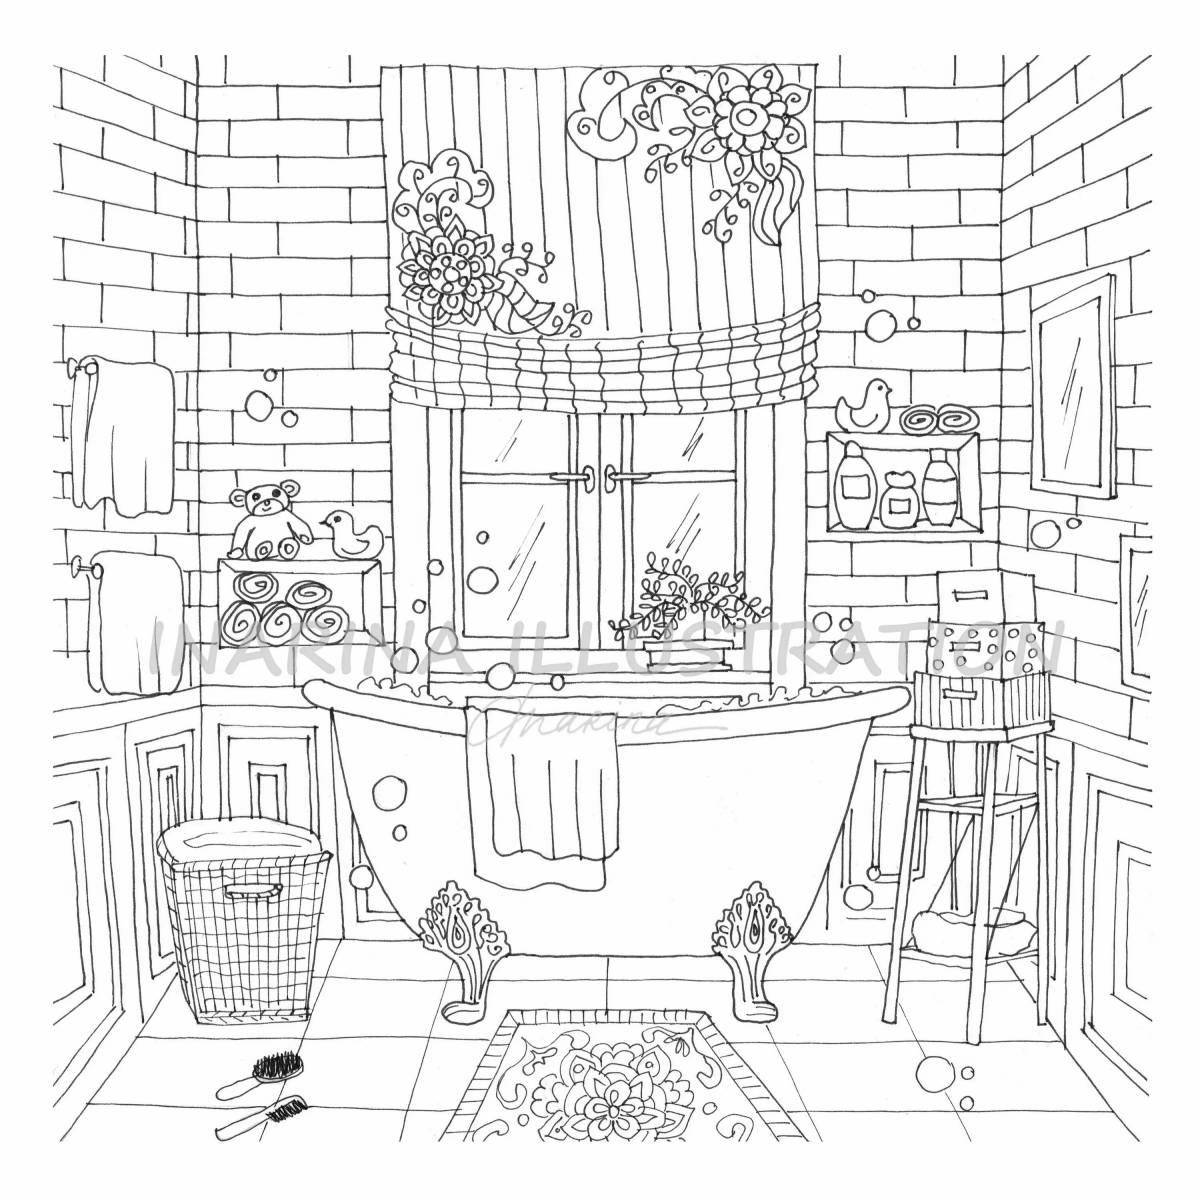 Colorful explosive housing coloring page for toddlers